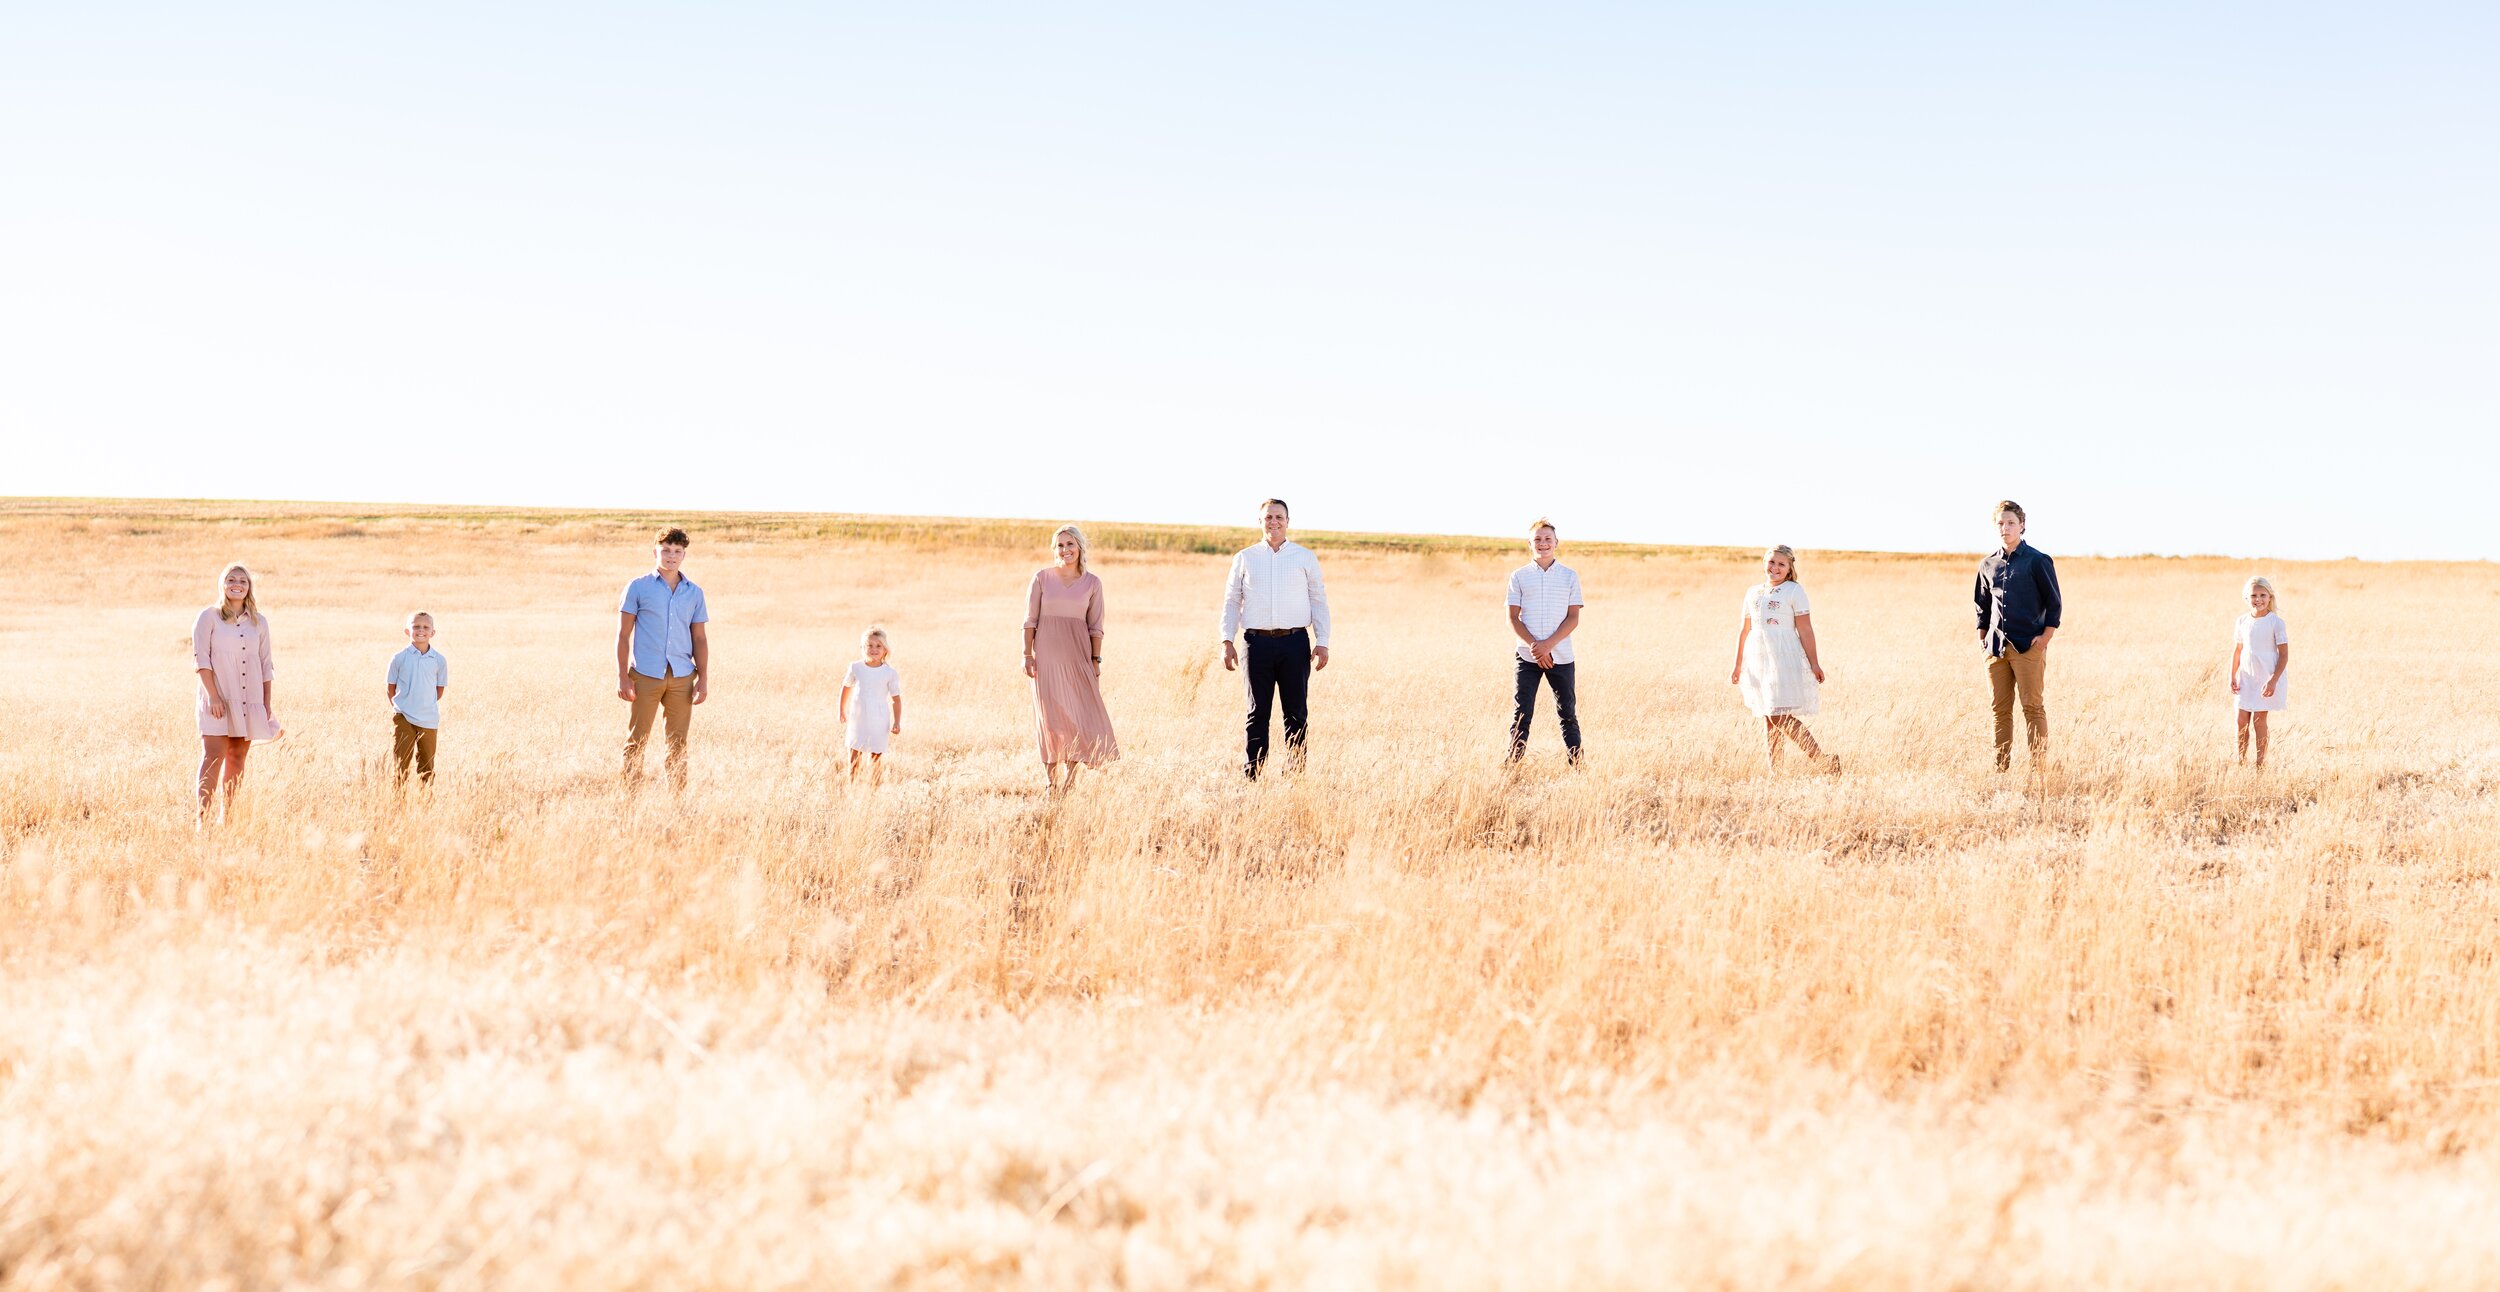 Royal City Large Family Desert Session - Family of 10 Pose - What to Wear to Family Photos - Royal City Family Photographer - Tri Cities Family Photographer - Morgan Tayler Photo &amp; Design